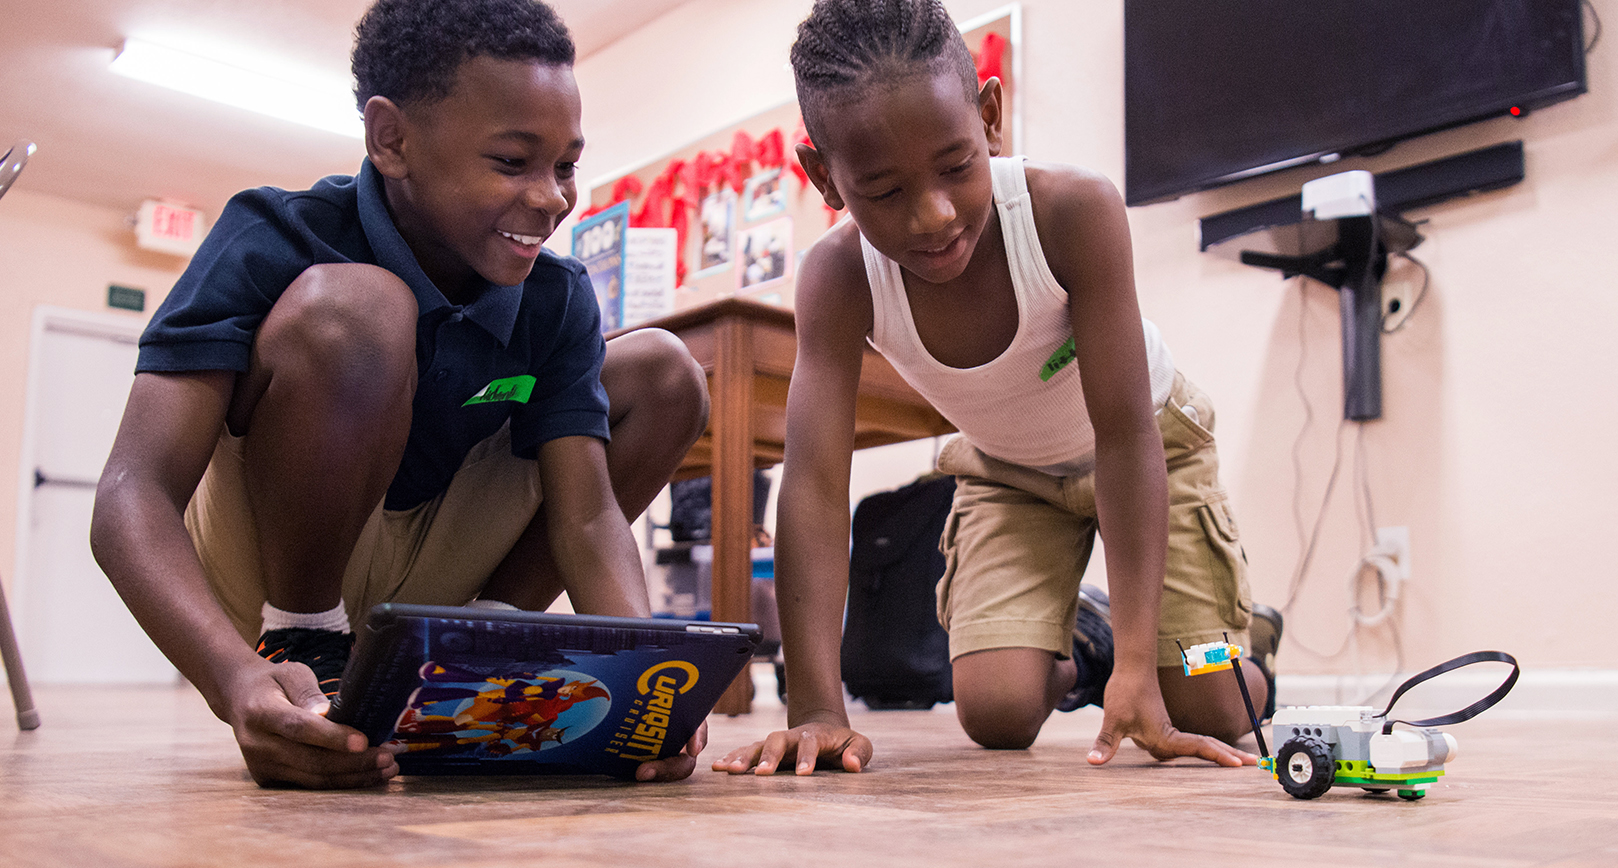 Two young boys practice coding on an iPad to control a Lego device. The children are smiling widely, sitting and squatting on the floor in a brightly lit room.